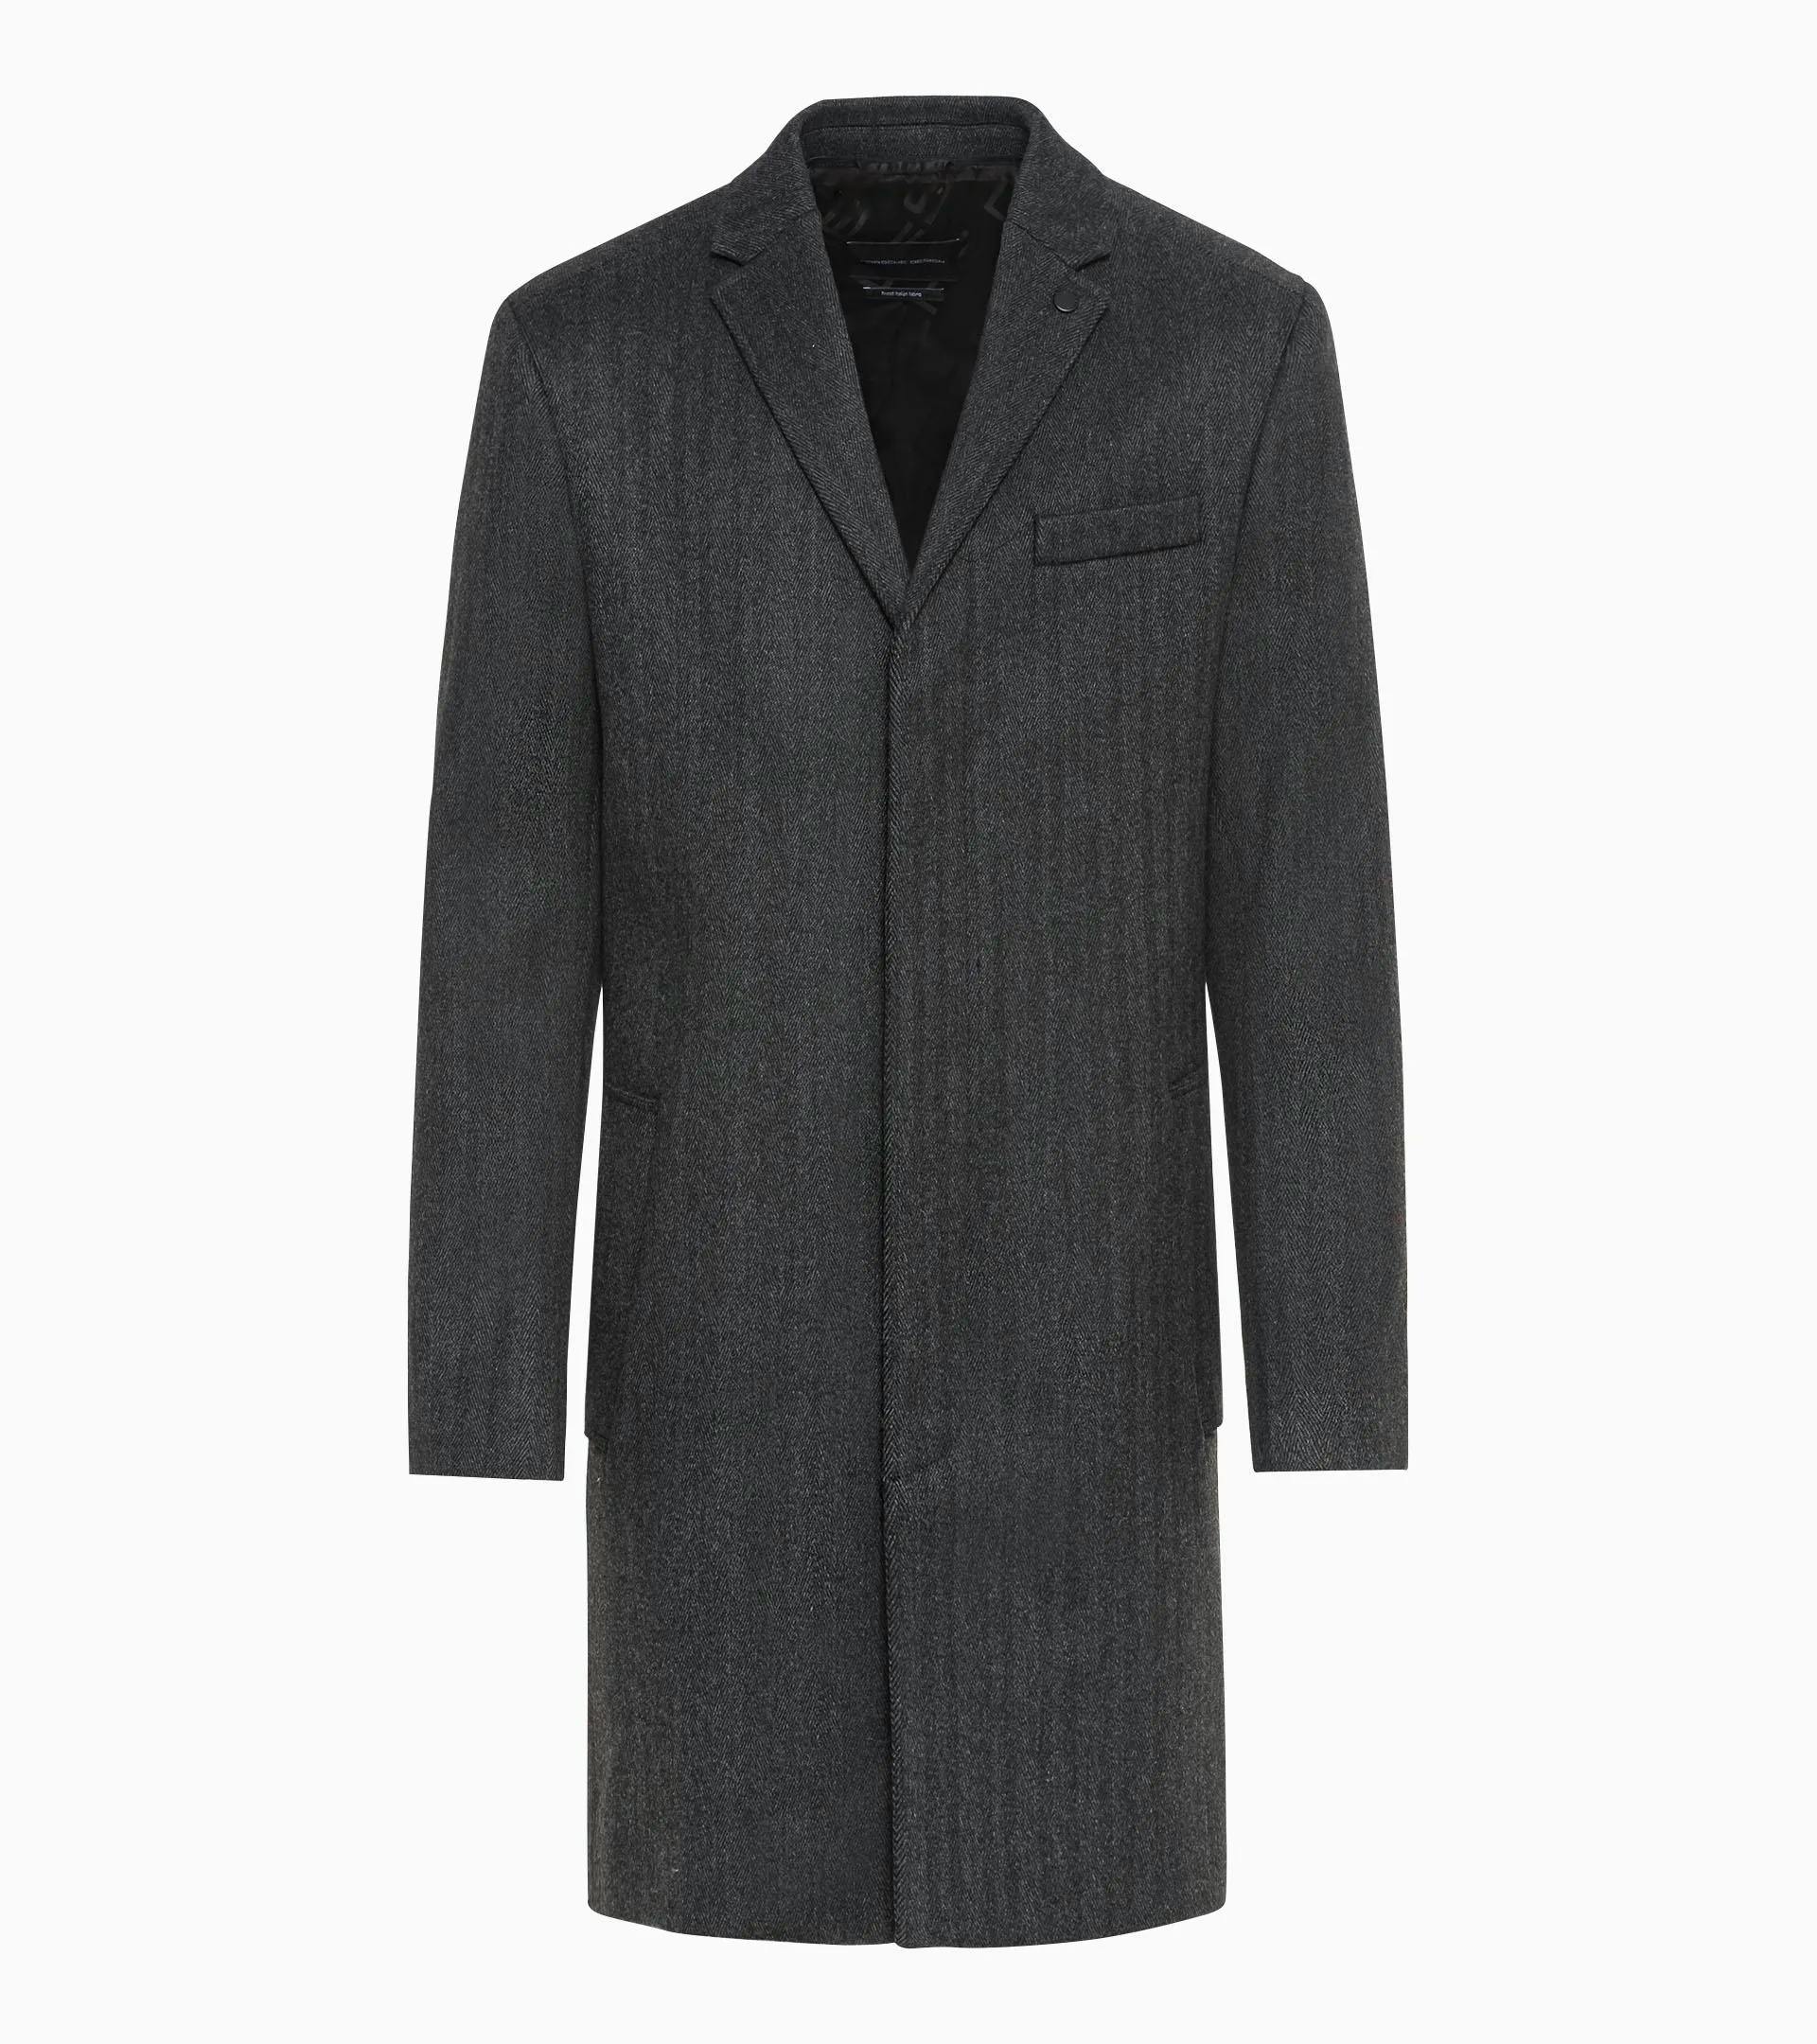 Hybrid Textured Formal Cappotto 3